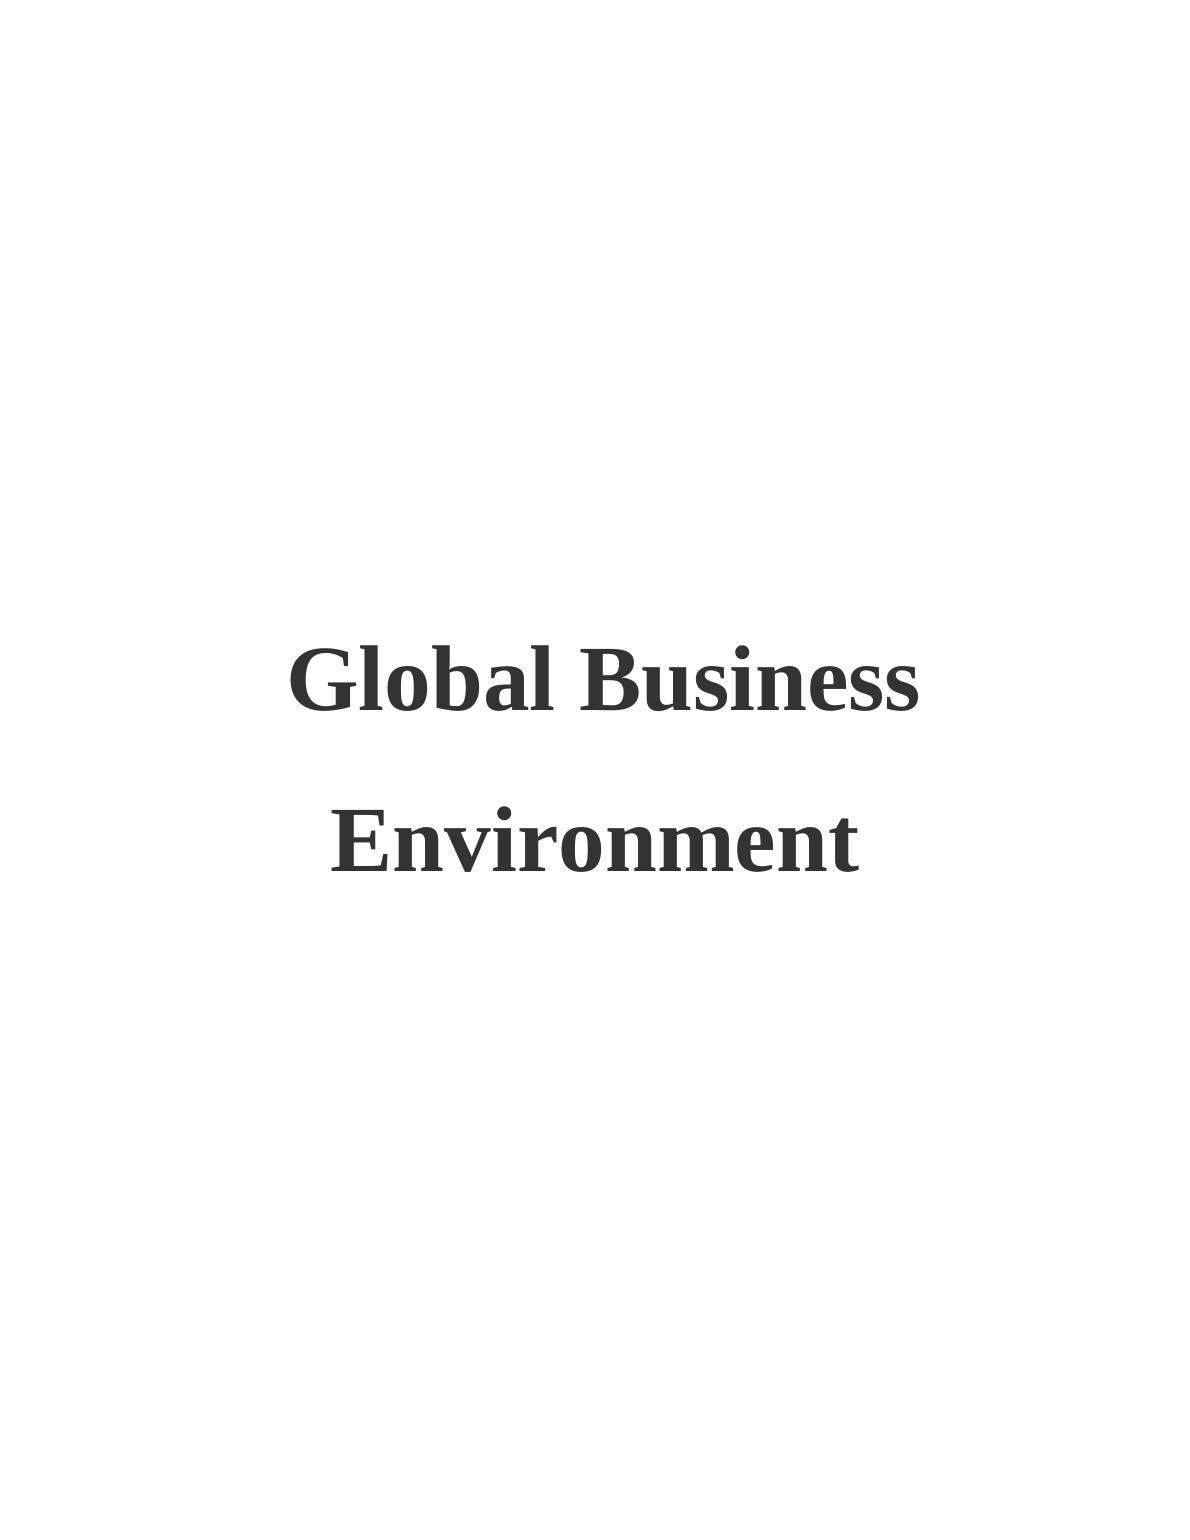 The Global Business Environment_1